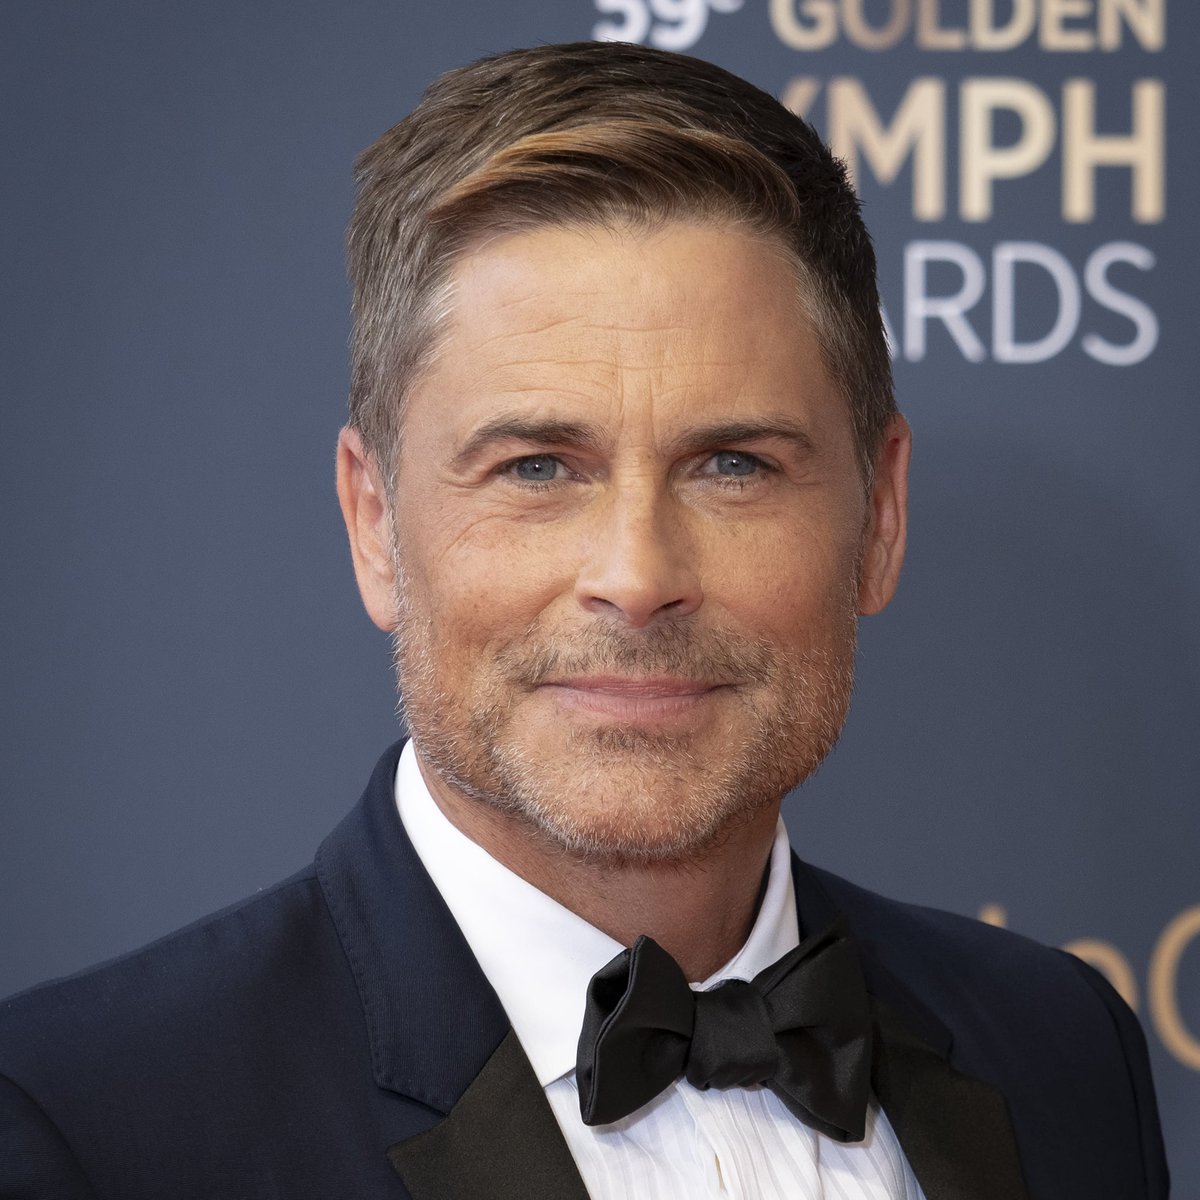  #MondayMotivation Here's a motivational thread of some of the best "Celebrity Comebacks" of all time. They didn't give up & it paid off! Just like it will for us once  @primevideouk announces our renewal.  #Sanditon will be the best comeback ever!   ROB LOWE 